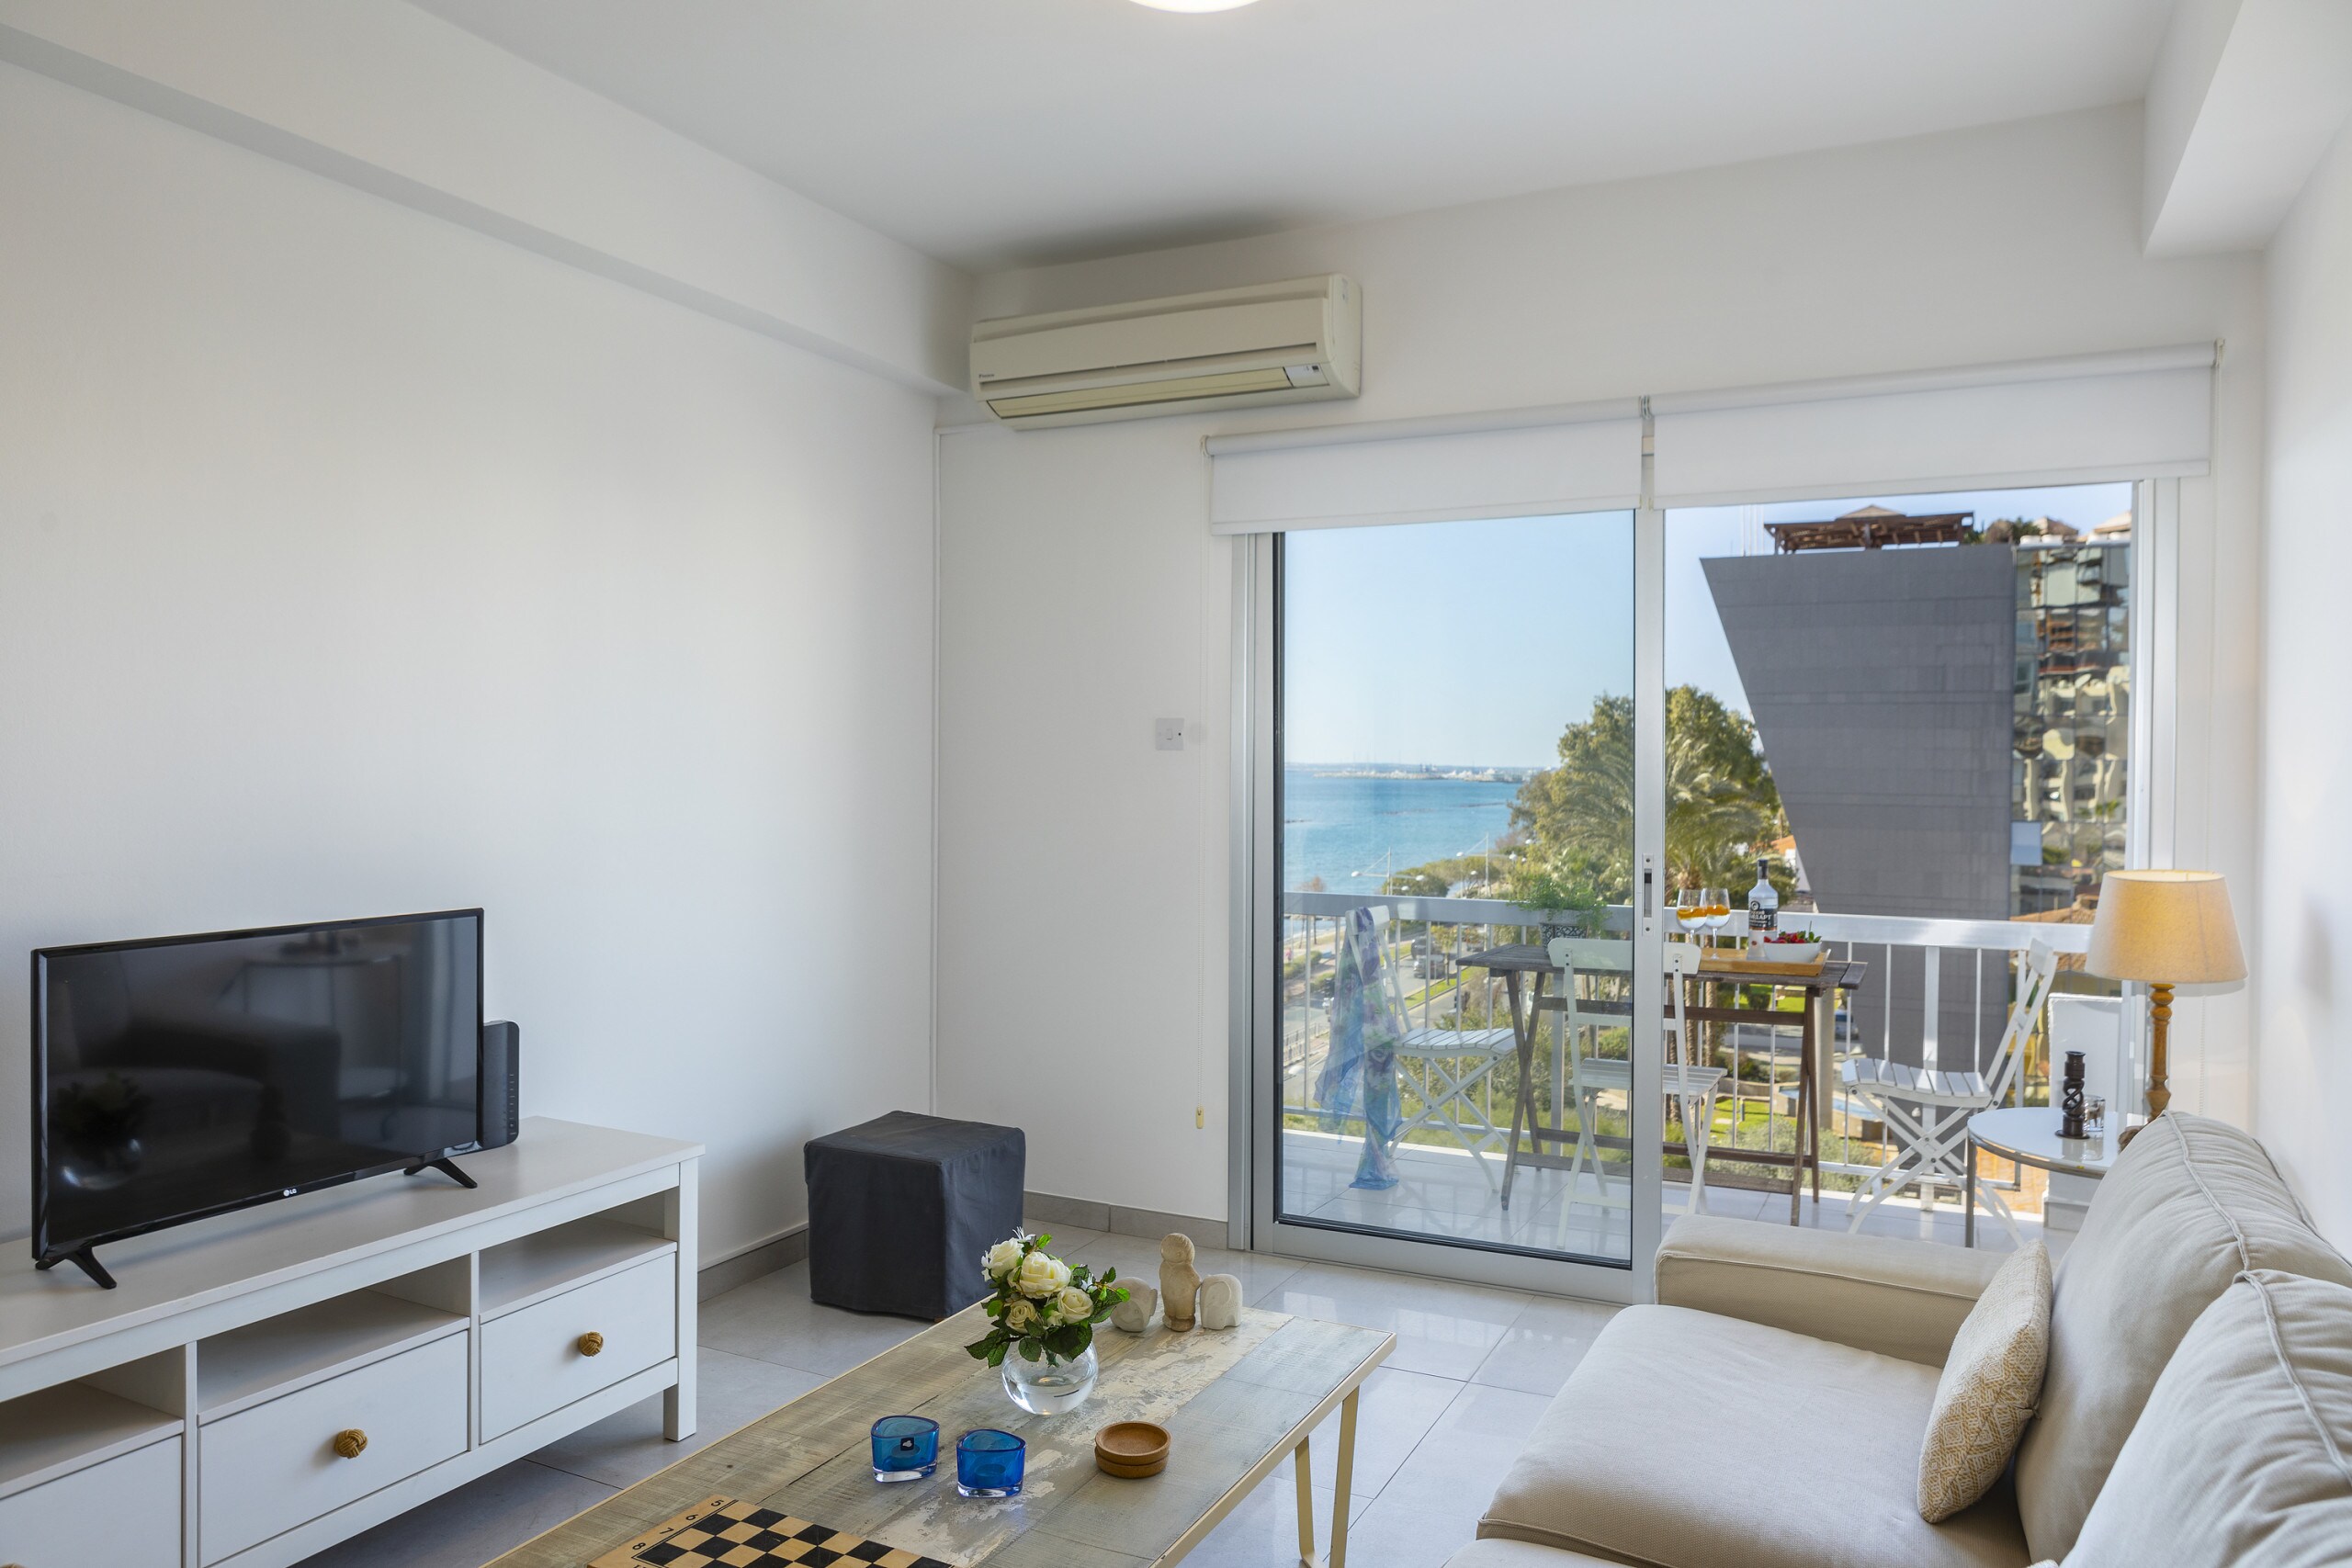 Property Image 2 - Light Filled Homey Flat with Nice Sea View from Balcony